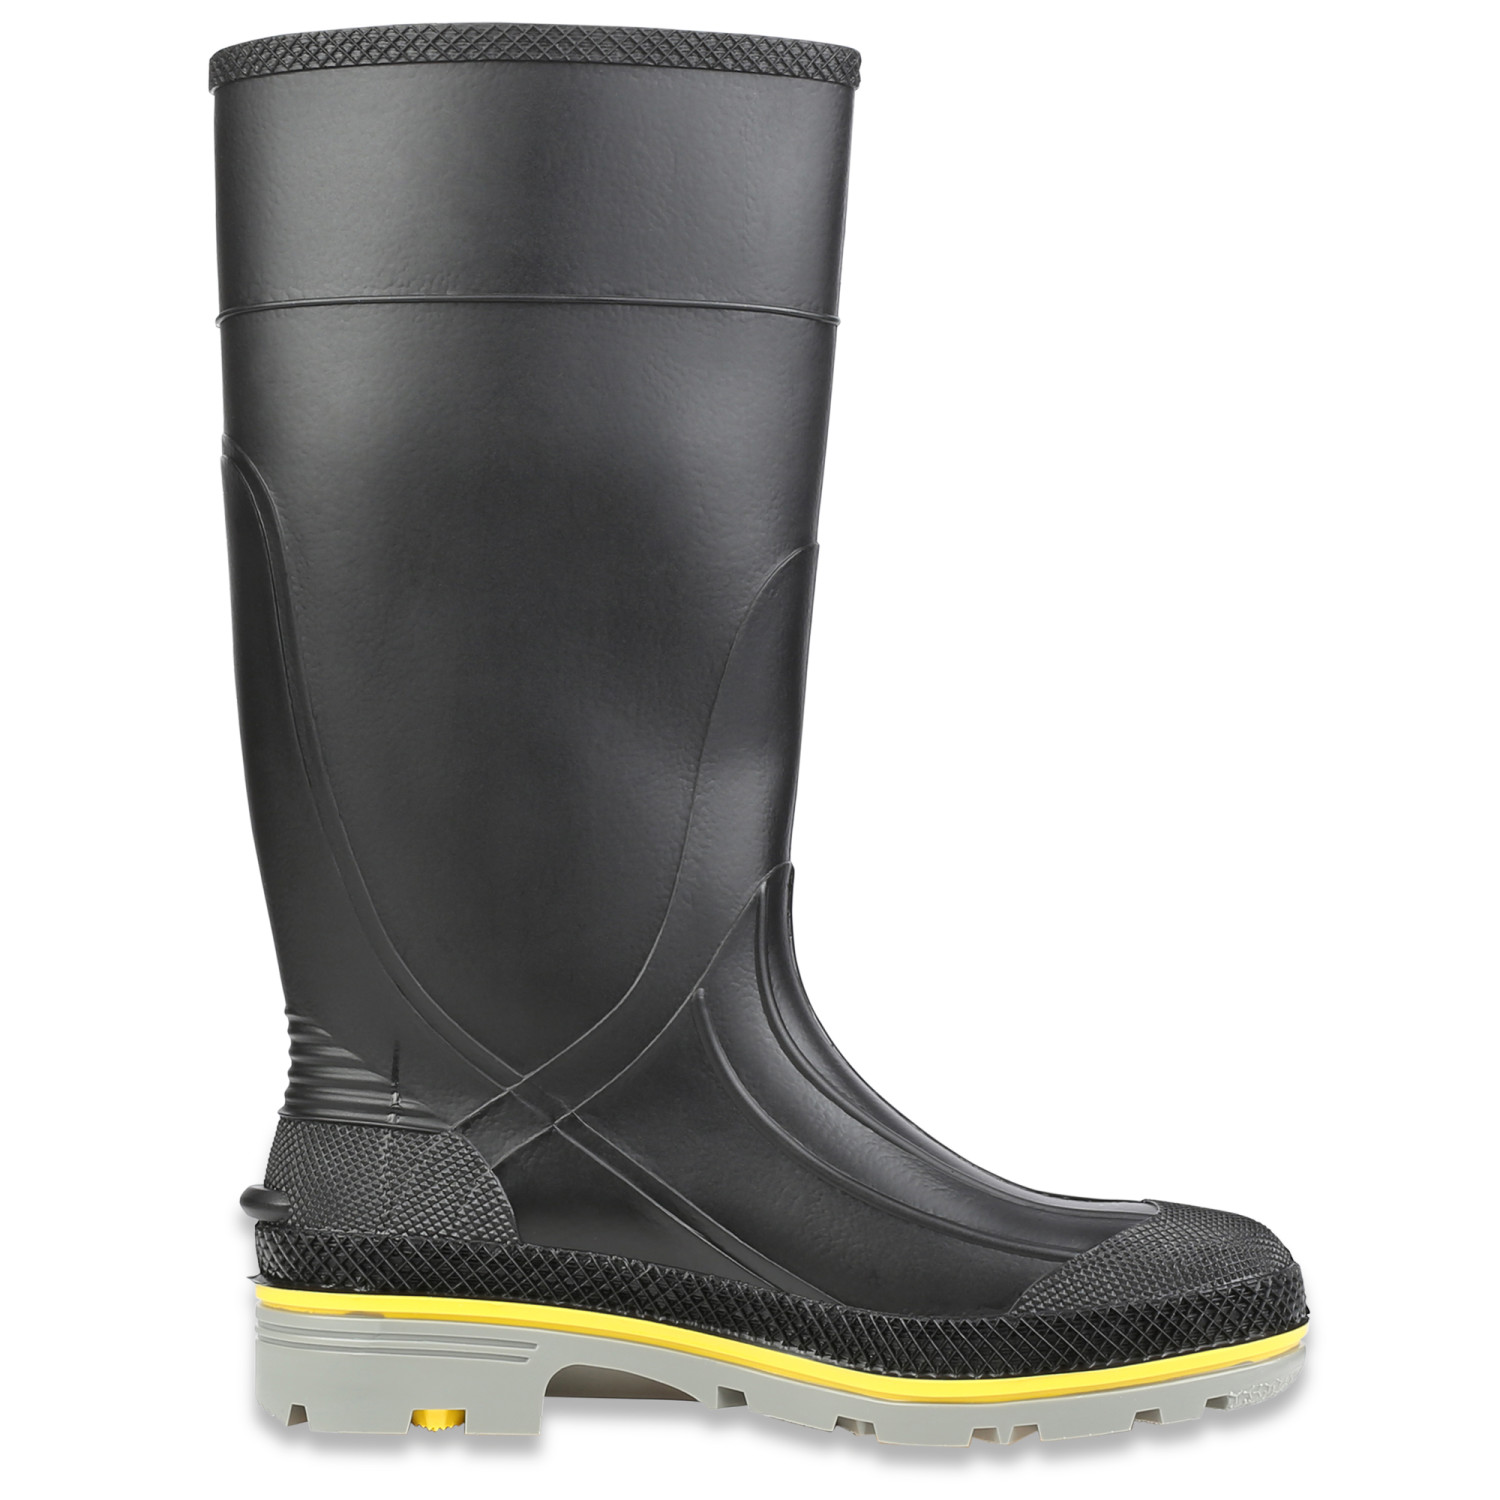 Servus XTP® XTRA TRACTION Steel Toe 15 in PVC Boot Size 12(M) - image 3 of 6